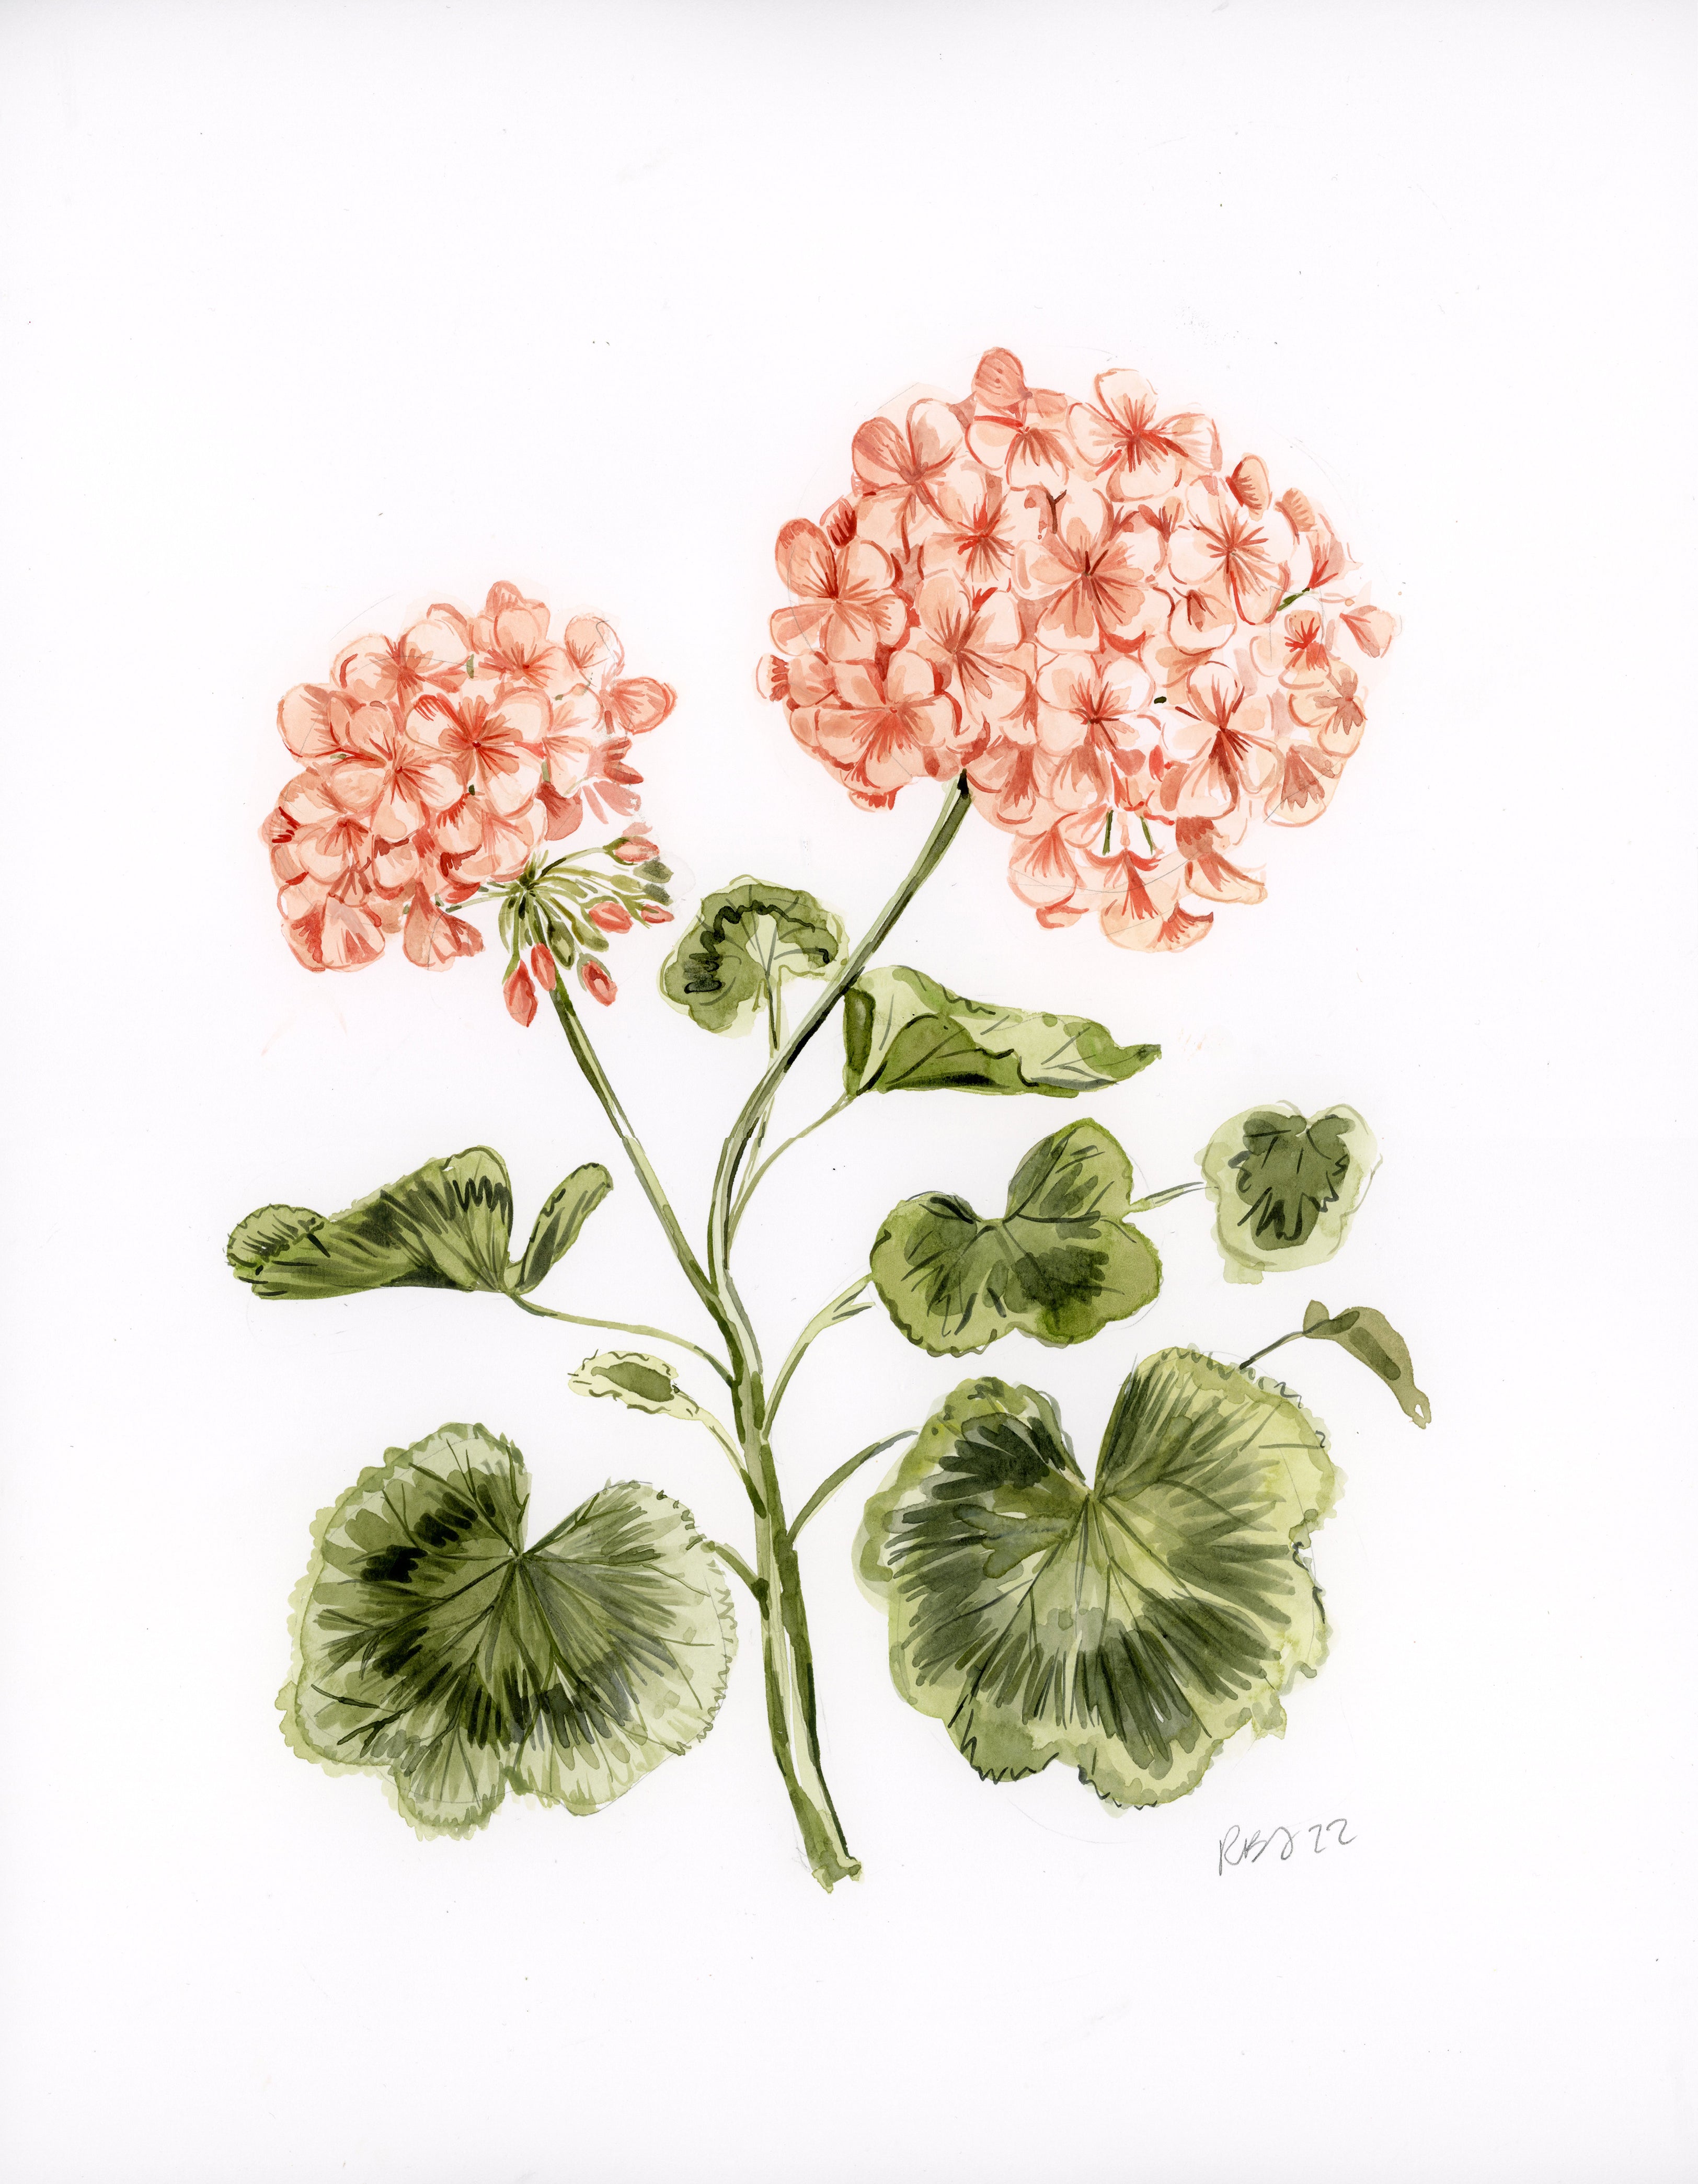 Stanley With Geraniums, Ink and Watercolor - Portraits of Animals